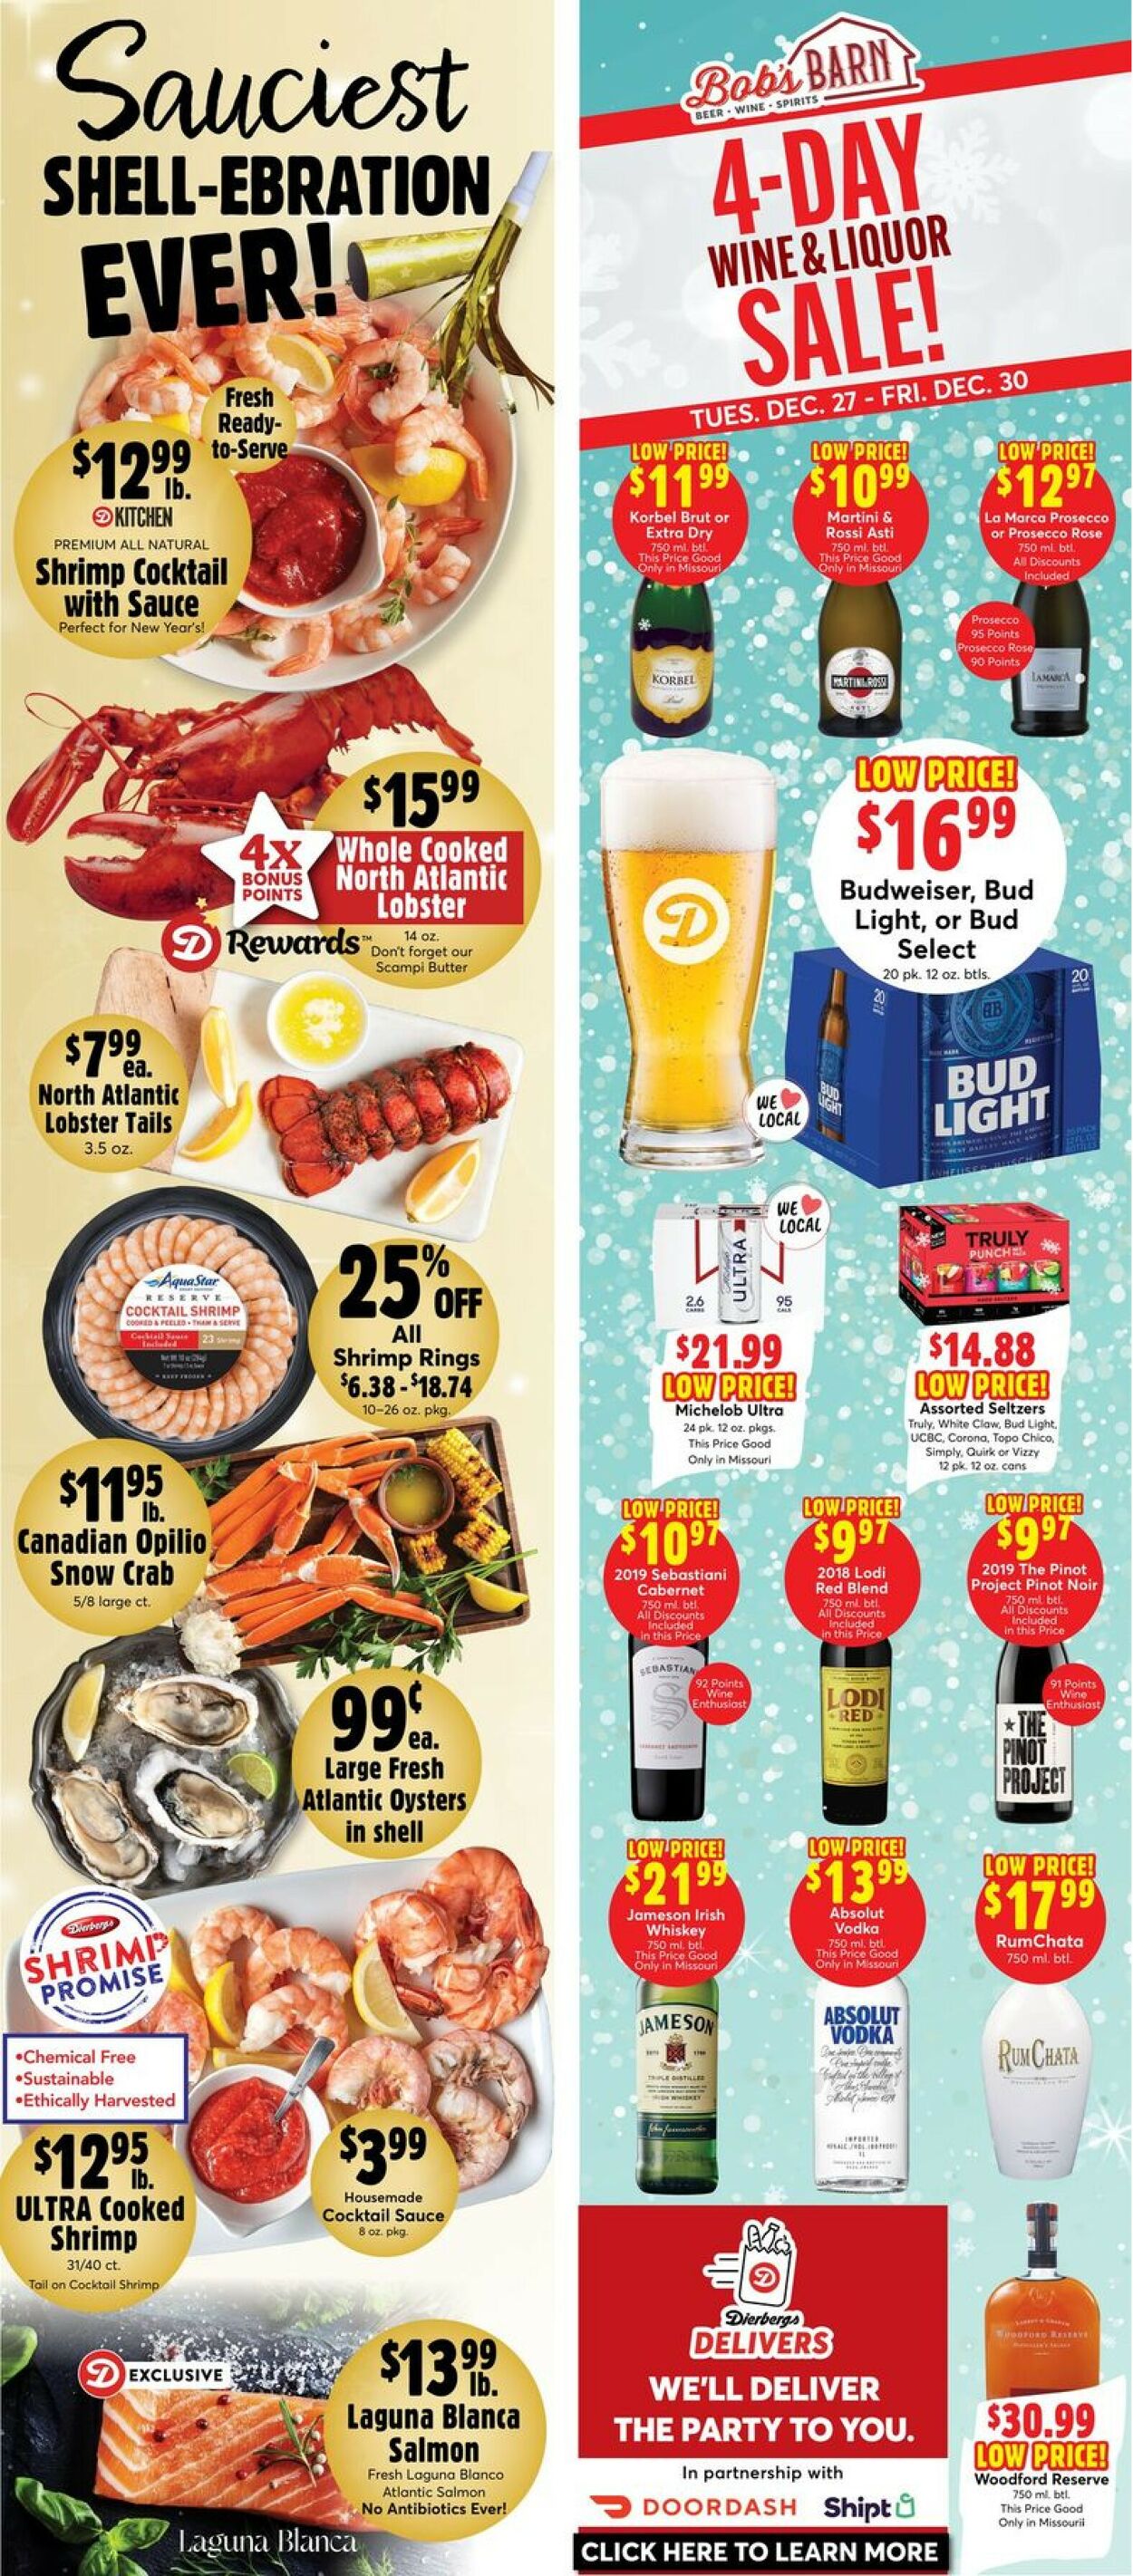 Catalogue Dierbergs from 12/26/2022